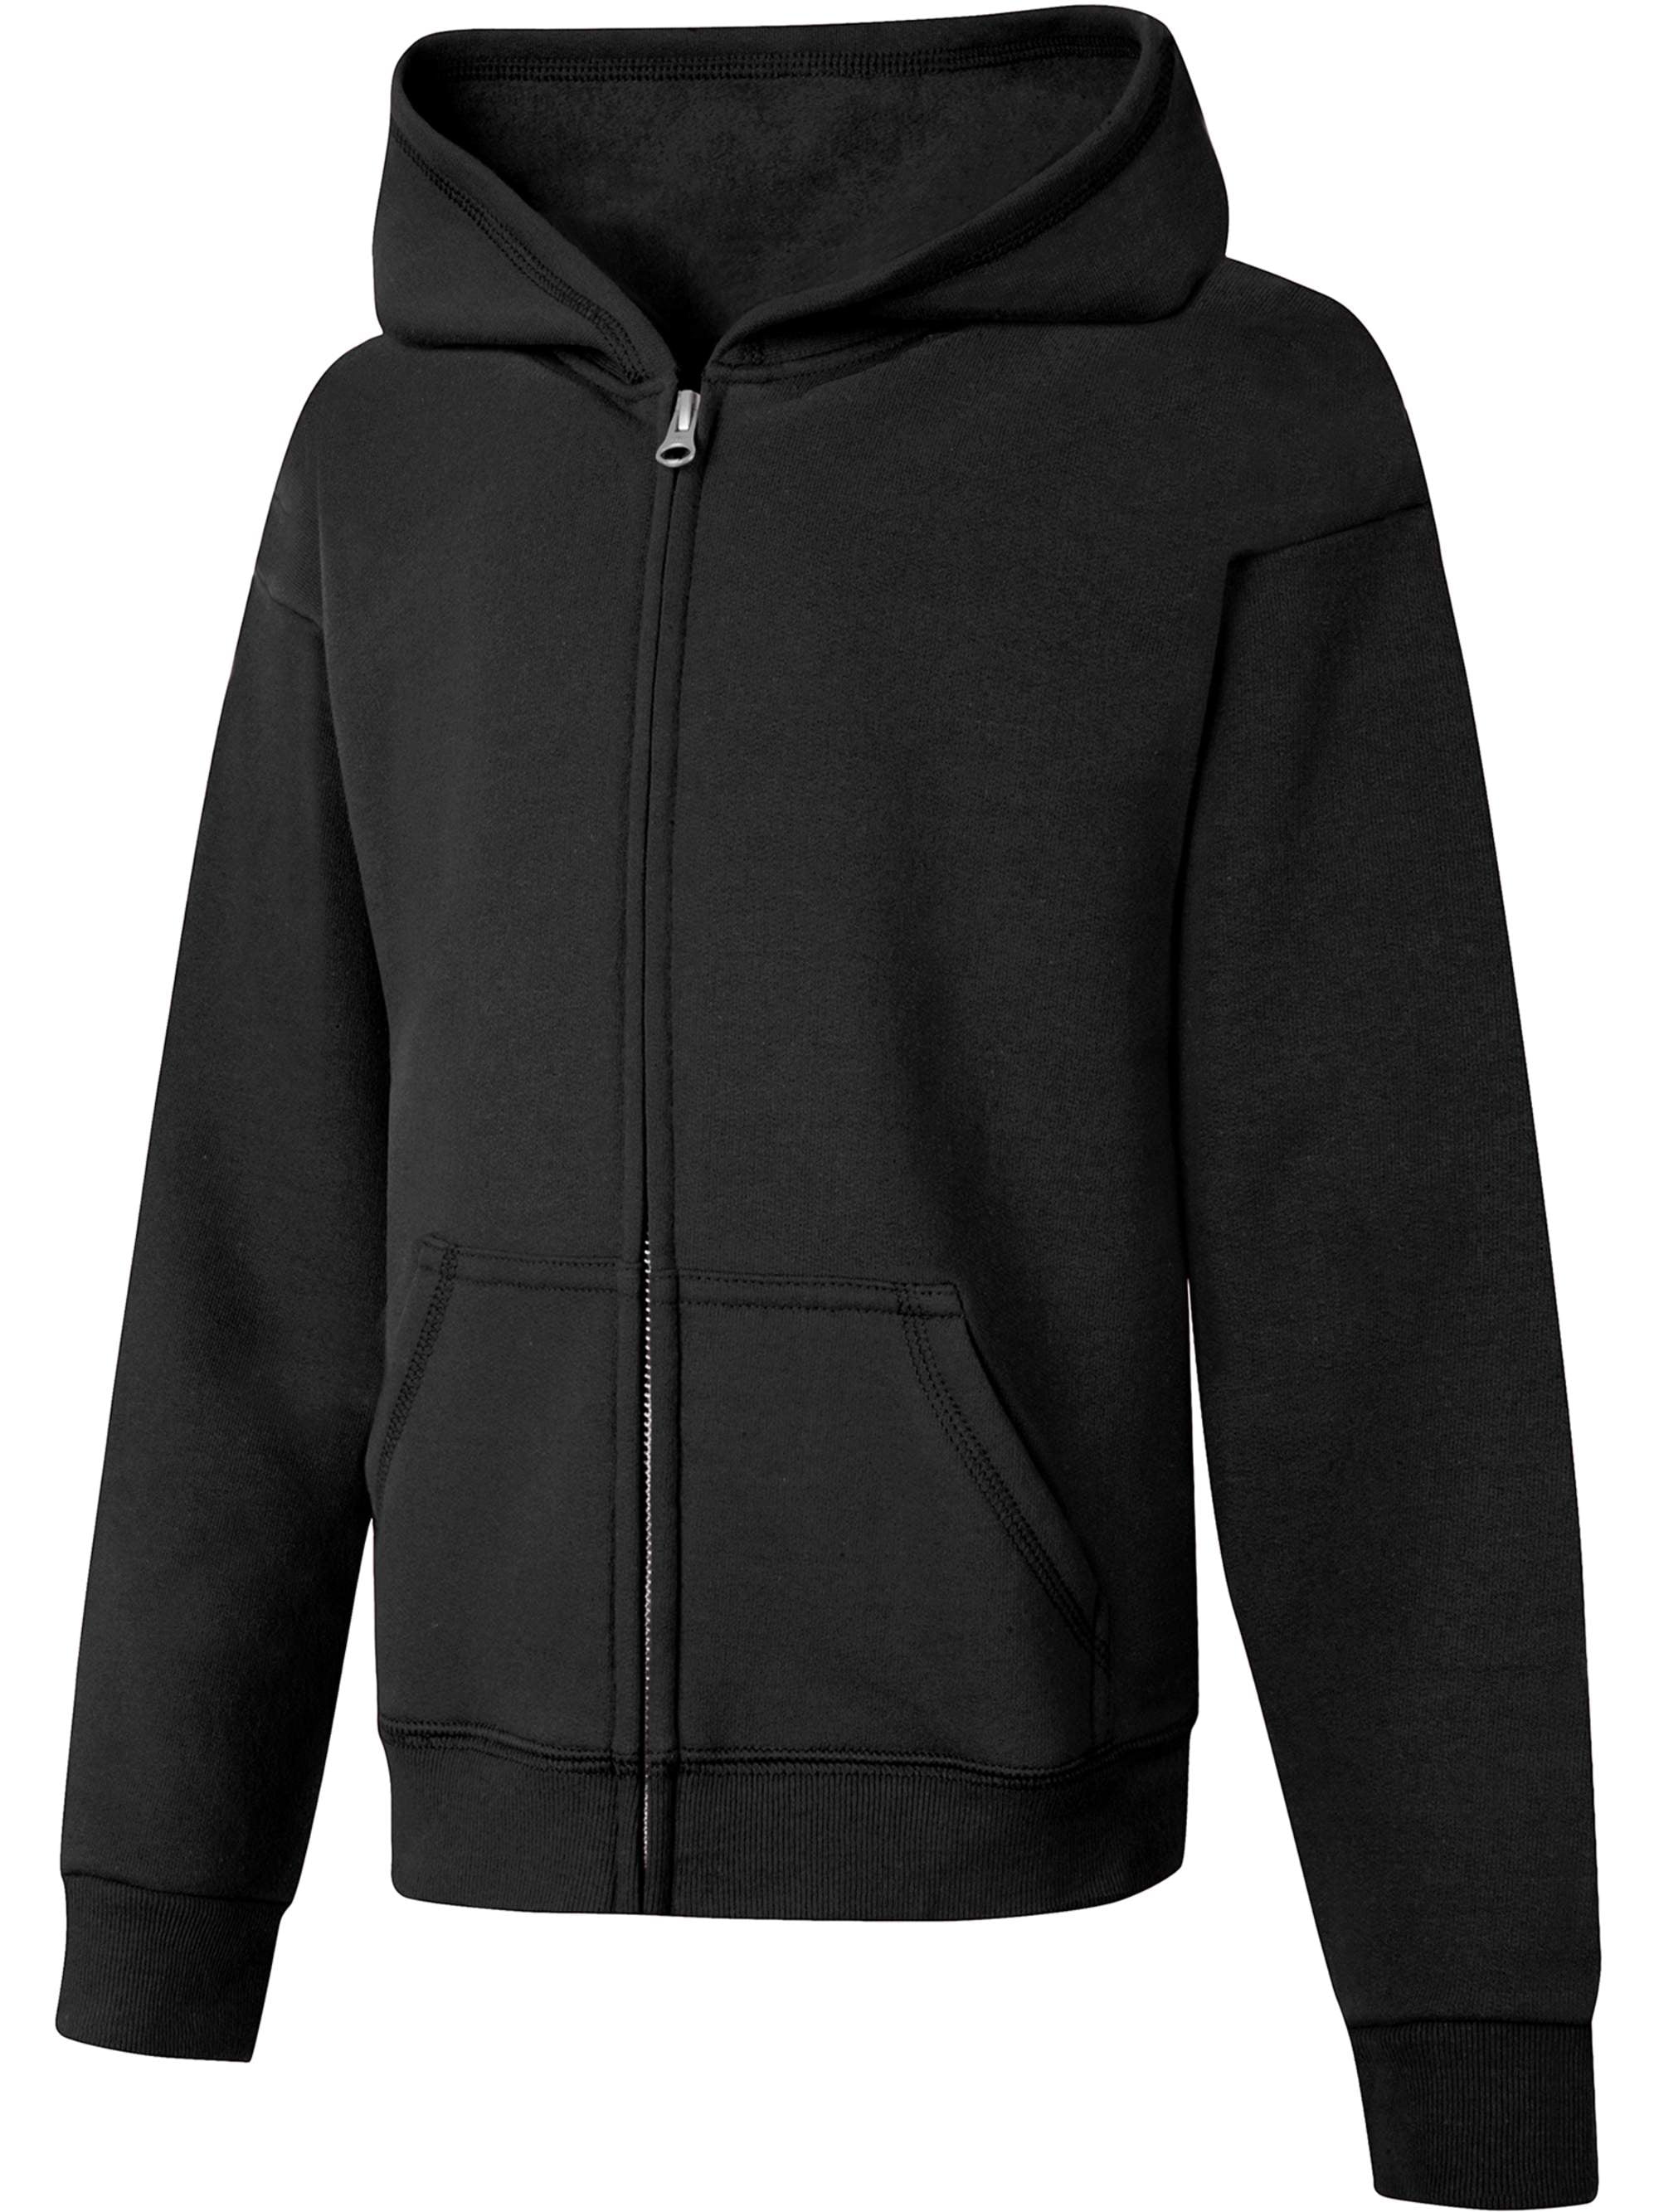 Full Sleeve Plain Women Black Cotton Hoodie, Size: Large at Rs 750